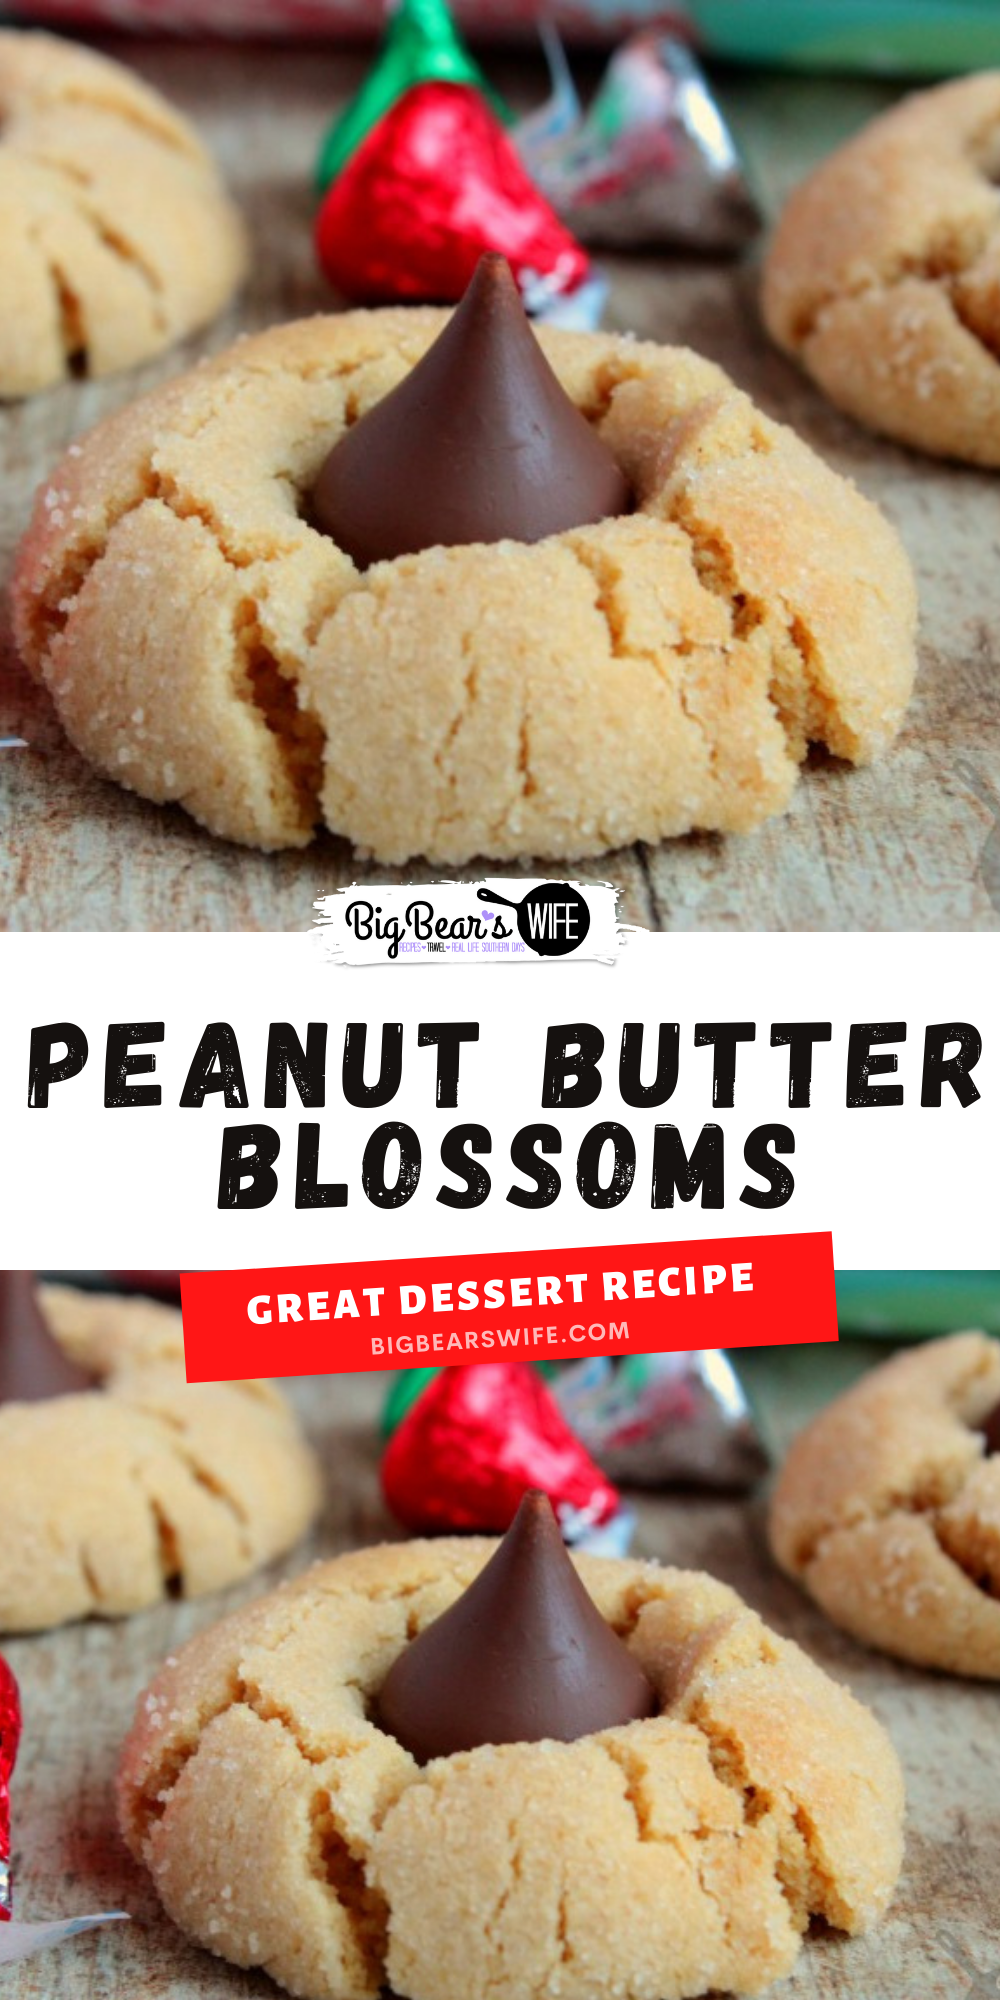 Peanut Butter Blossoms - Chocolate Kiss Peanut Butter Cookies- Sweet Peanut Butter cookies rolled in sugar and then baked to perfection! As soon as they come out of the oven, press a chocolate kiss down into the center to make the best Peanut Butter Blossoms! via @bigbearswife